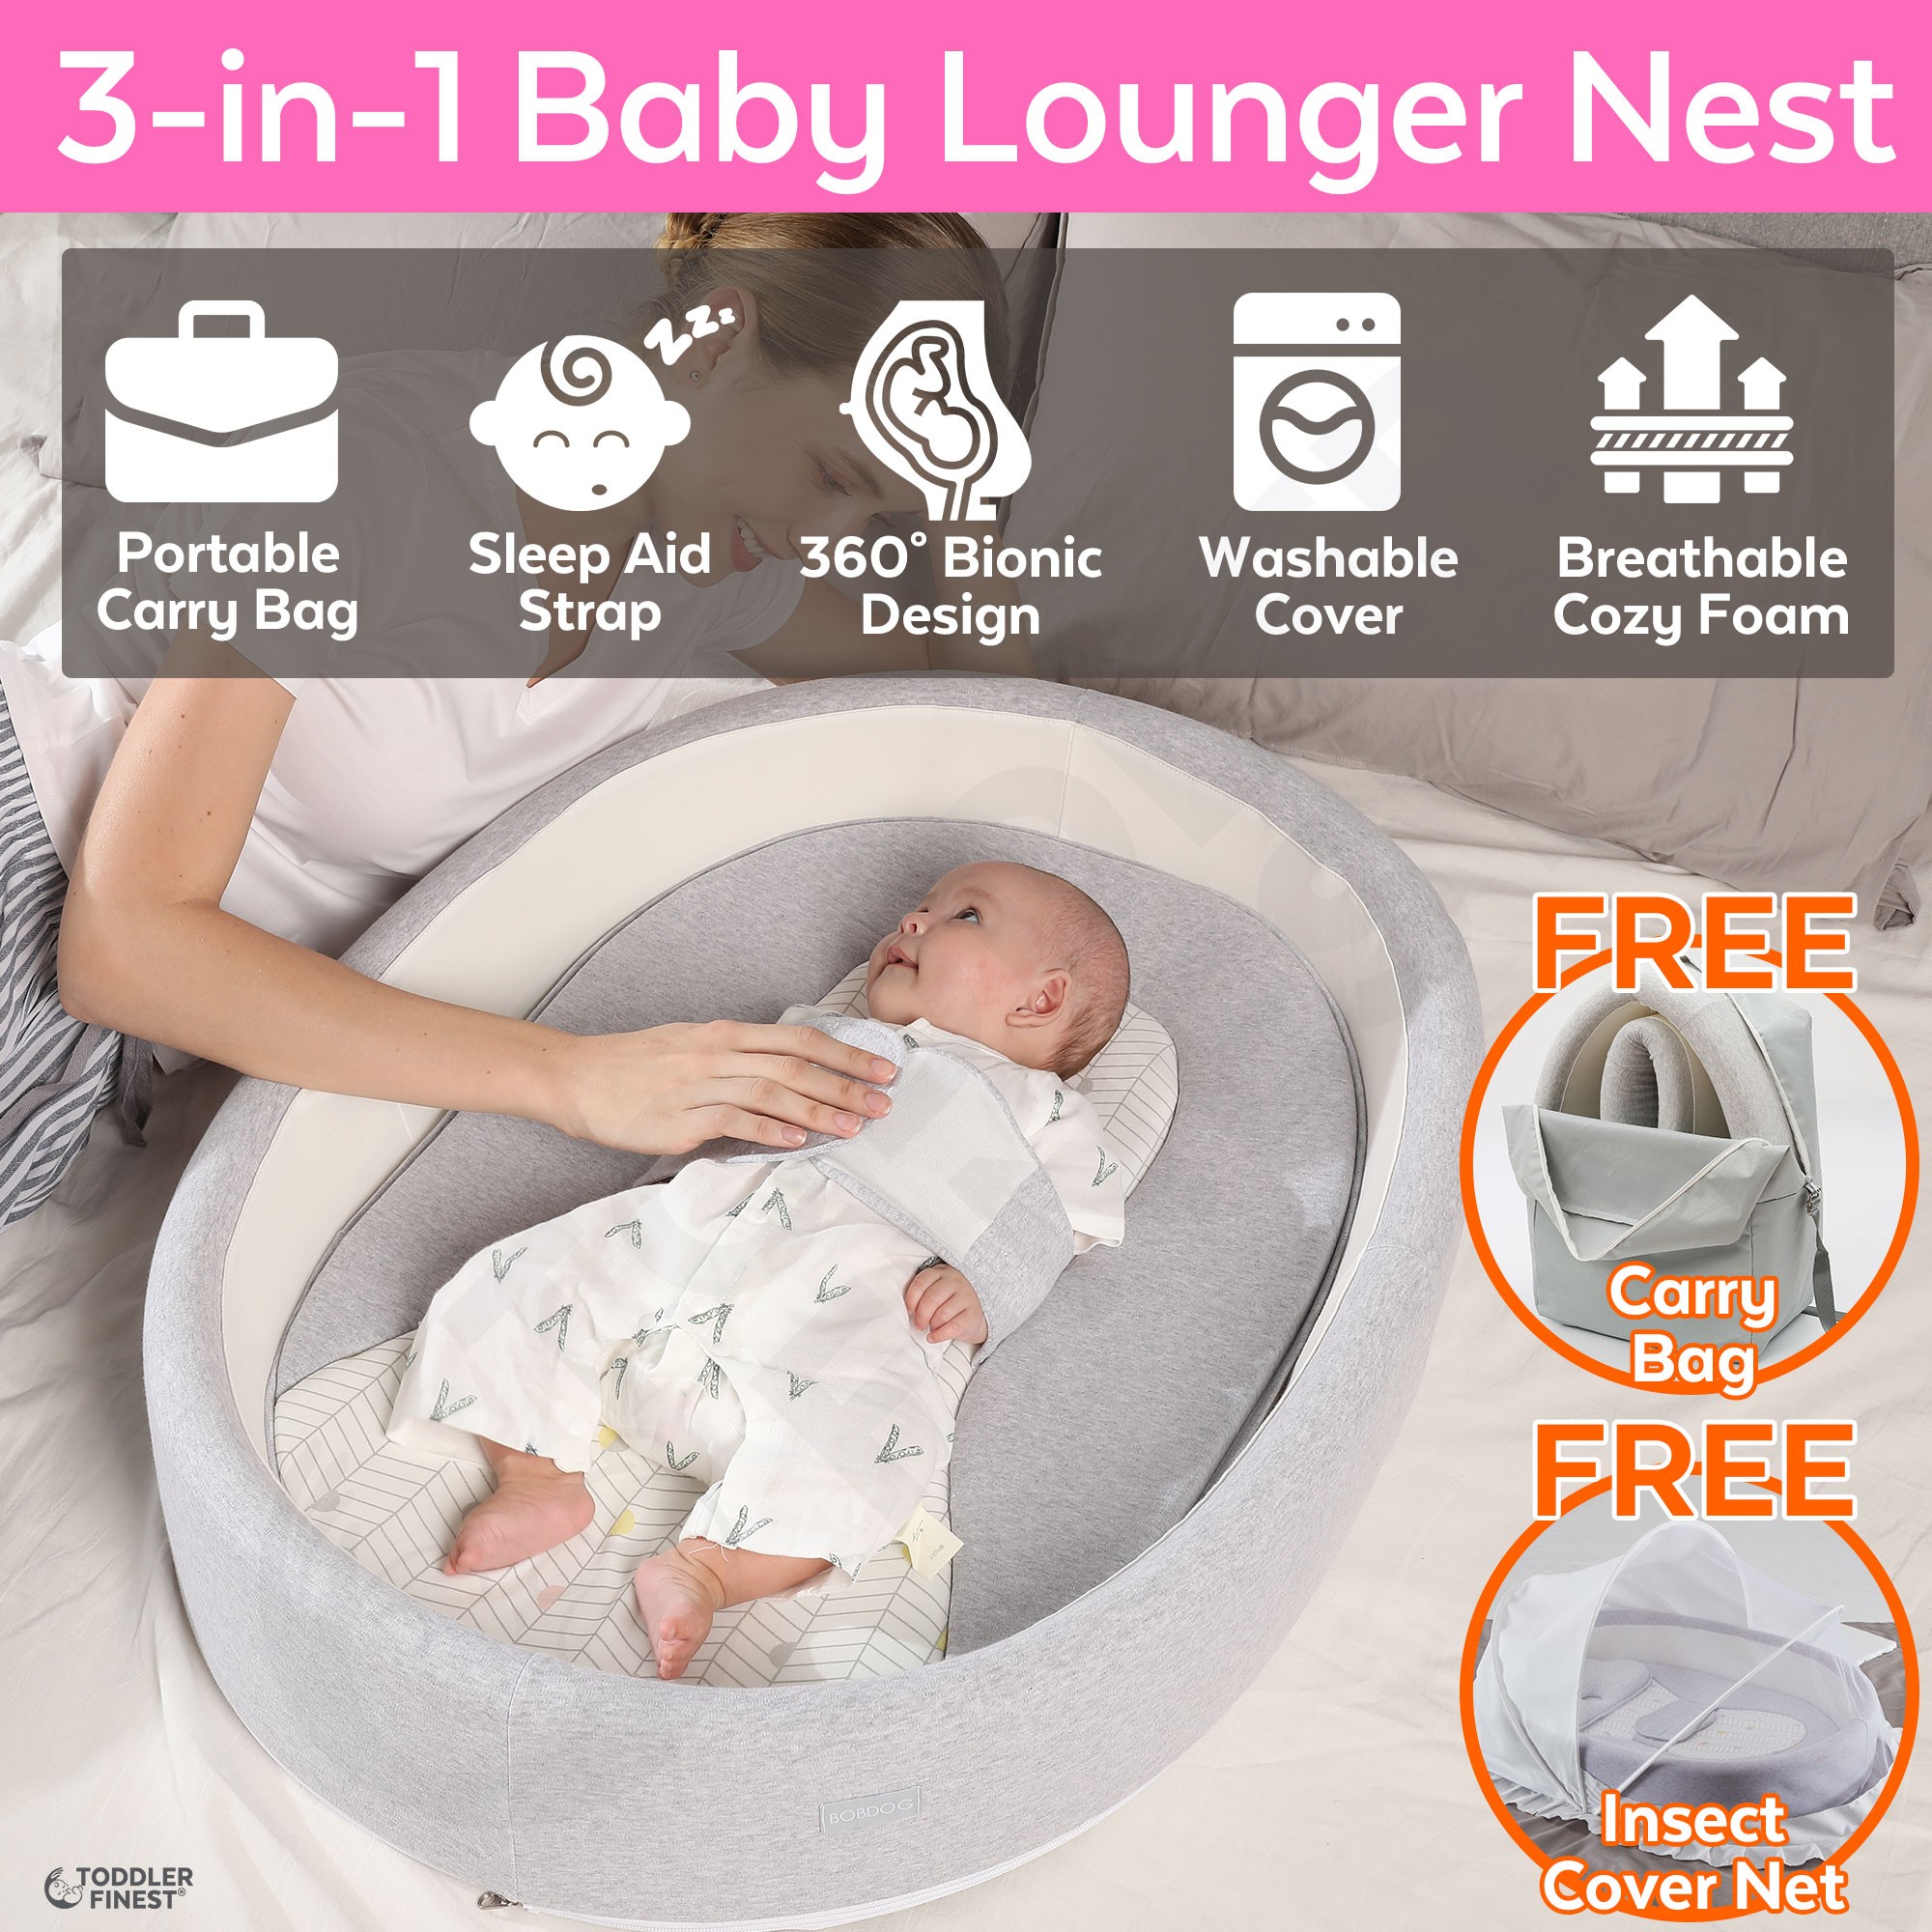 Stars Baby Lounger and Nest,Wave Baby Nest Sharing Co Sleeping Baby Bassinet Breathable & Hypoallergenic Portable Crib Newborn Baby Nest Machine Washable 